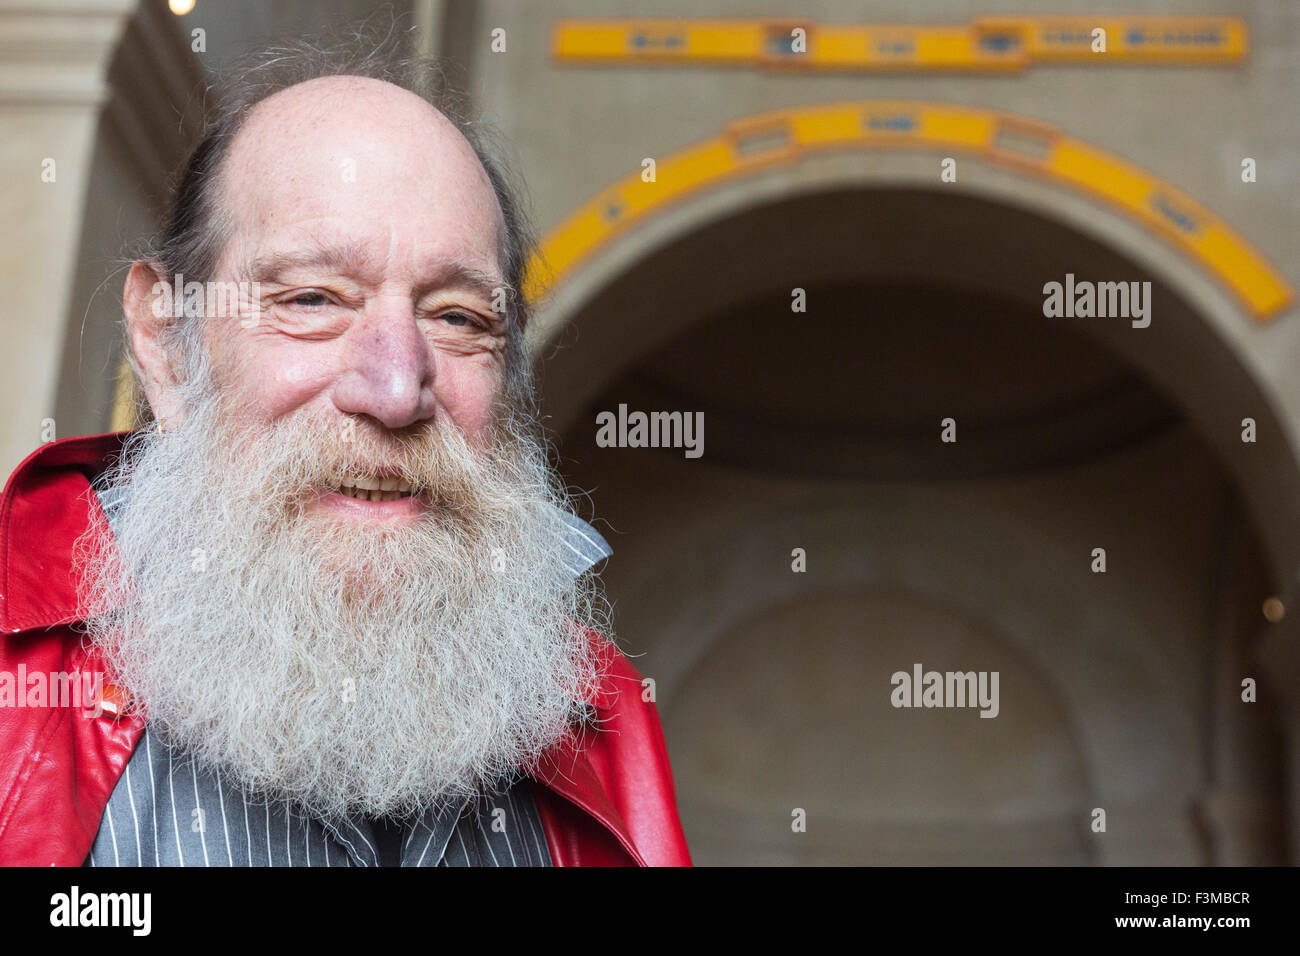 Woodstock, Oxfordshire, UK. 09/10/2015. Pictured: artist Lawrence Weiner. The exhibition 'Within a Realm of Distance', Lawrence Weiner at Blenheim Palace opens on 10 October and runs until 20 December 2015. Stock Photo